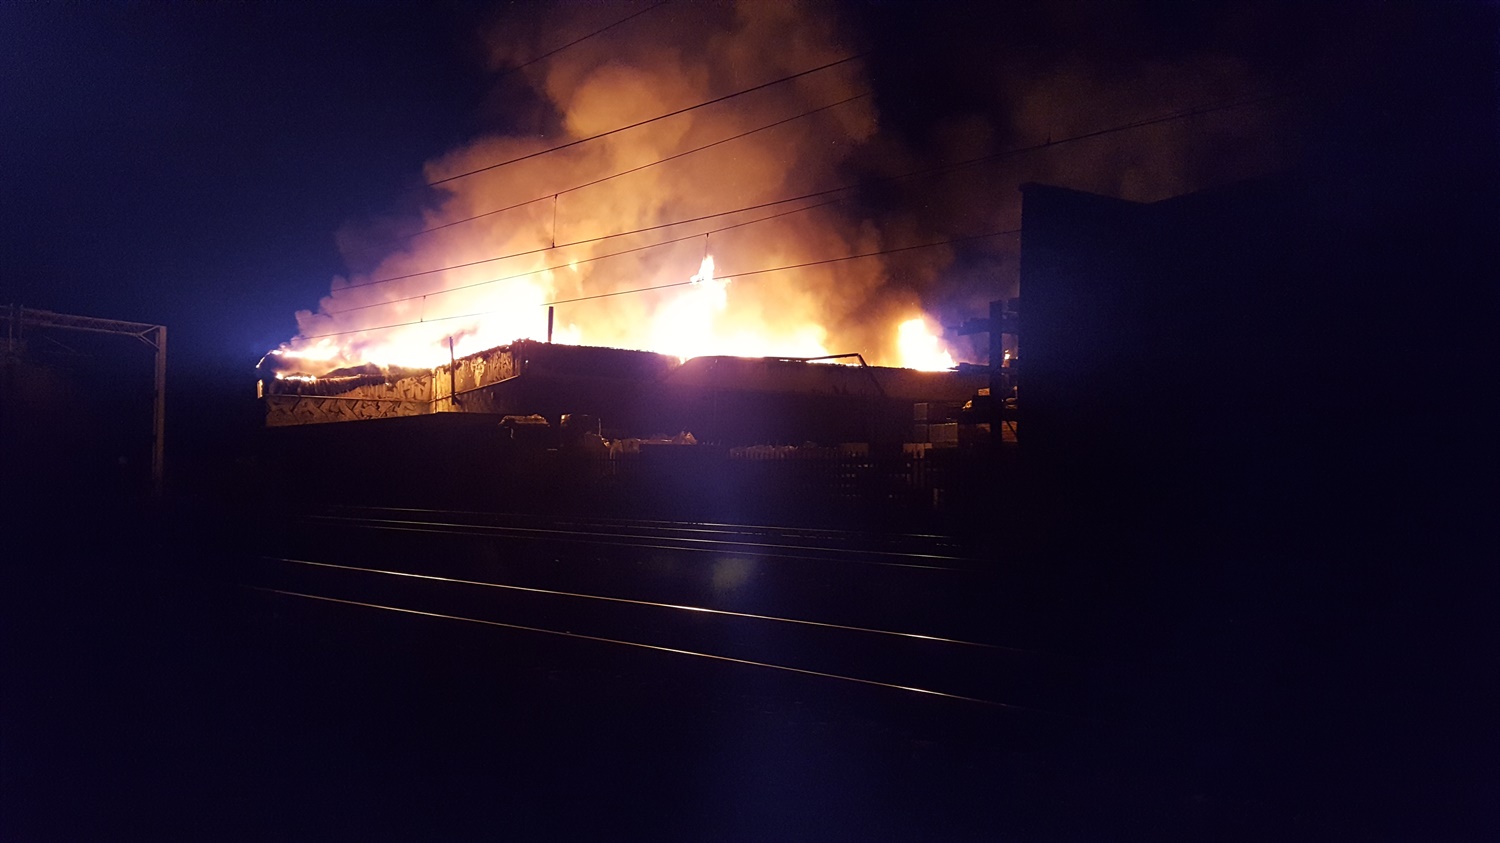 Major delays expected on WCML following blaze 